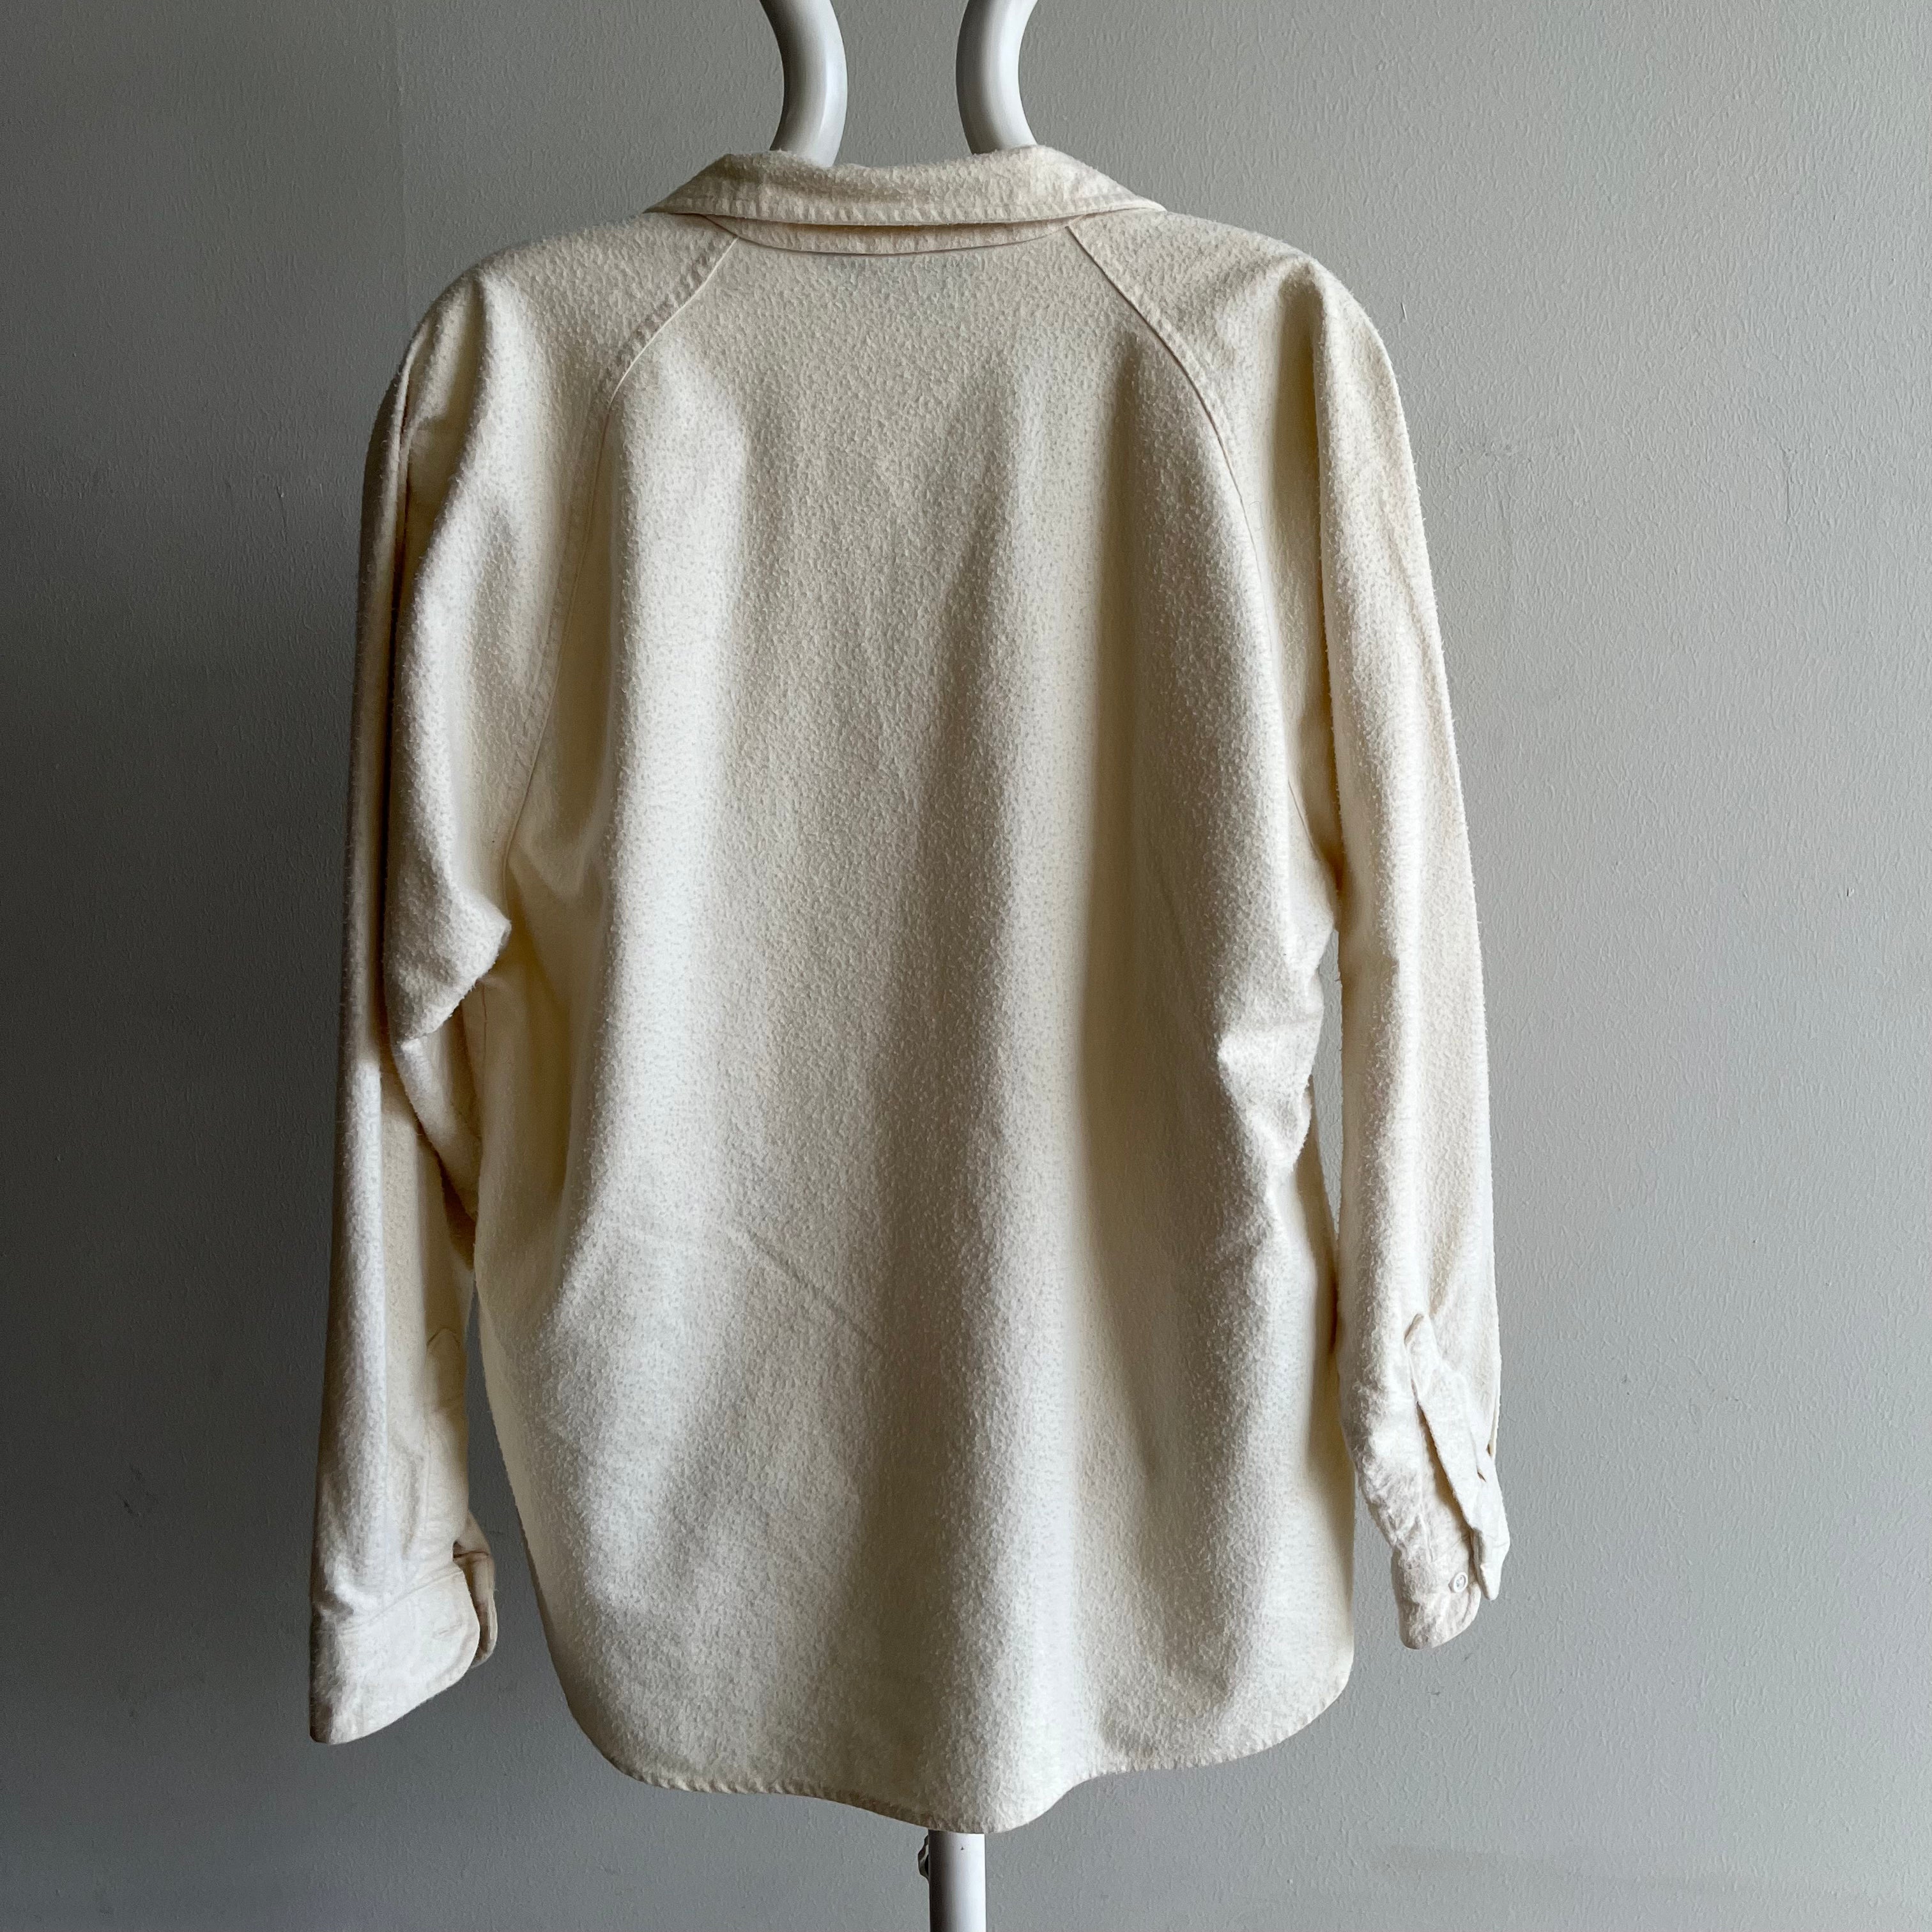 1980s USA MADE RARE Woolrich Women's Creamy White Flannel